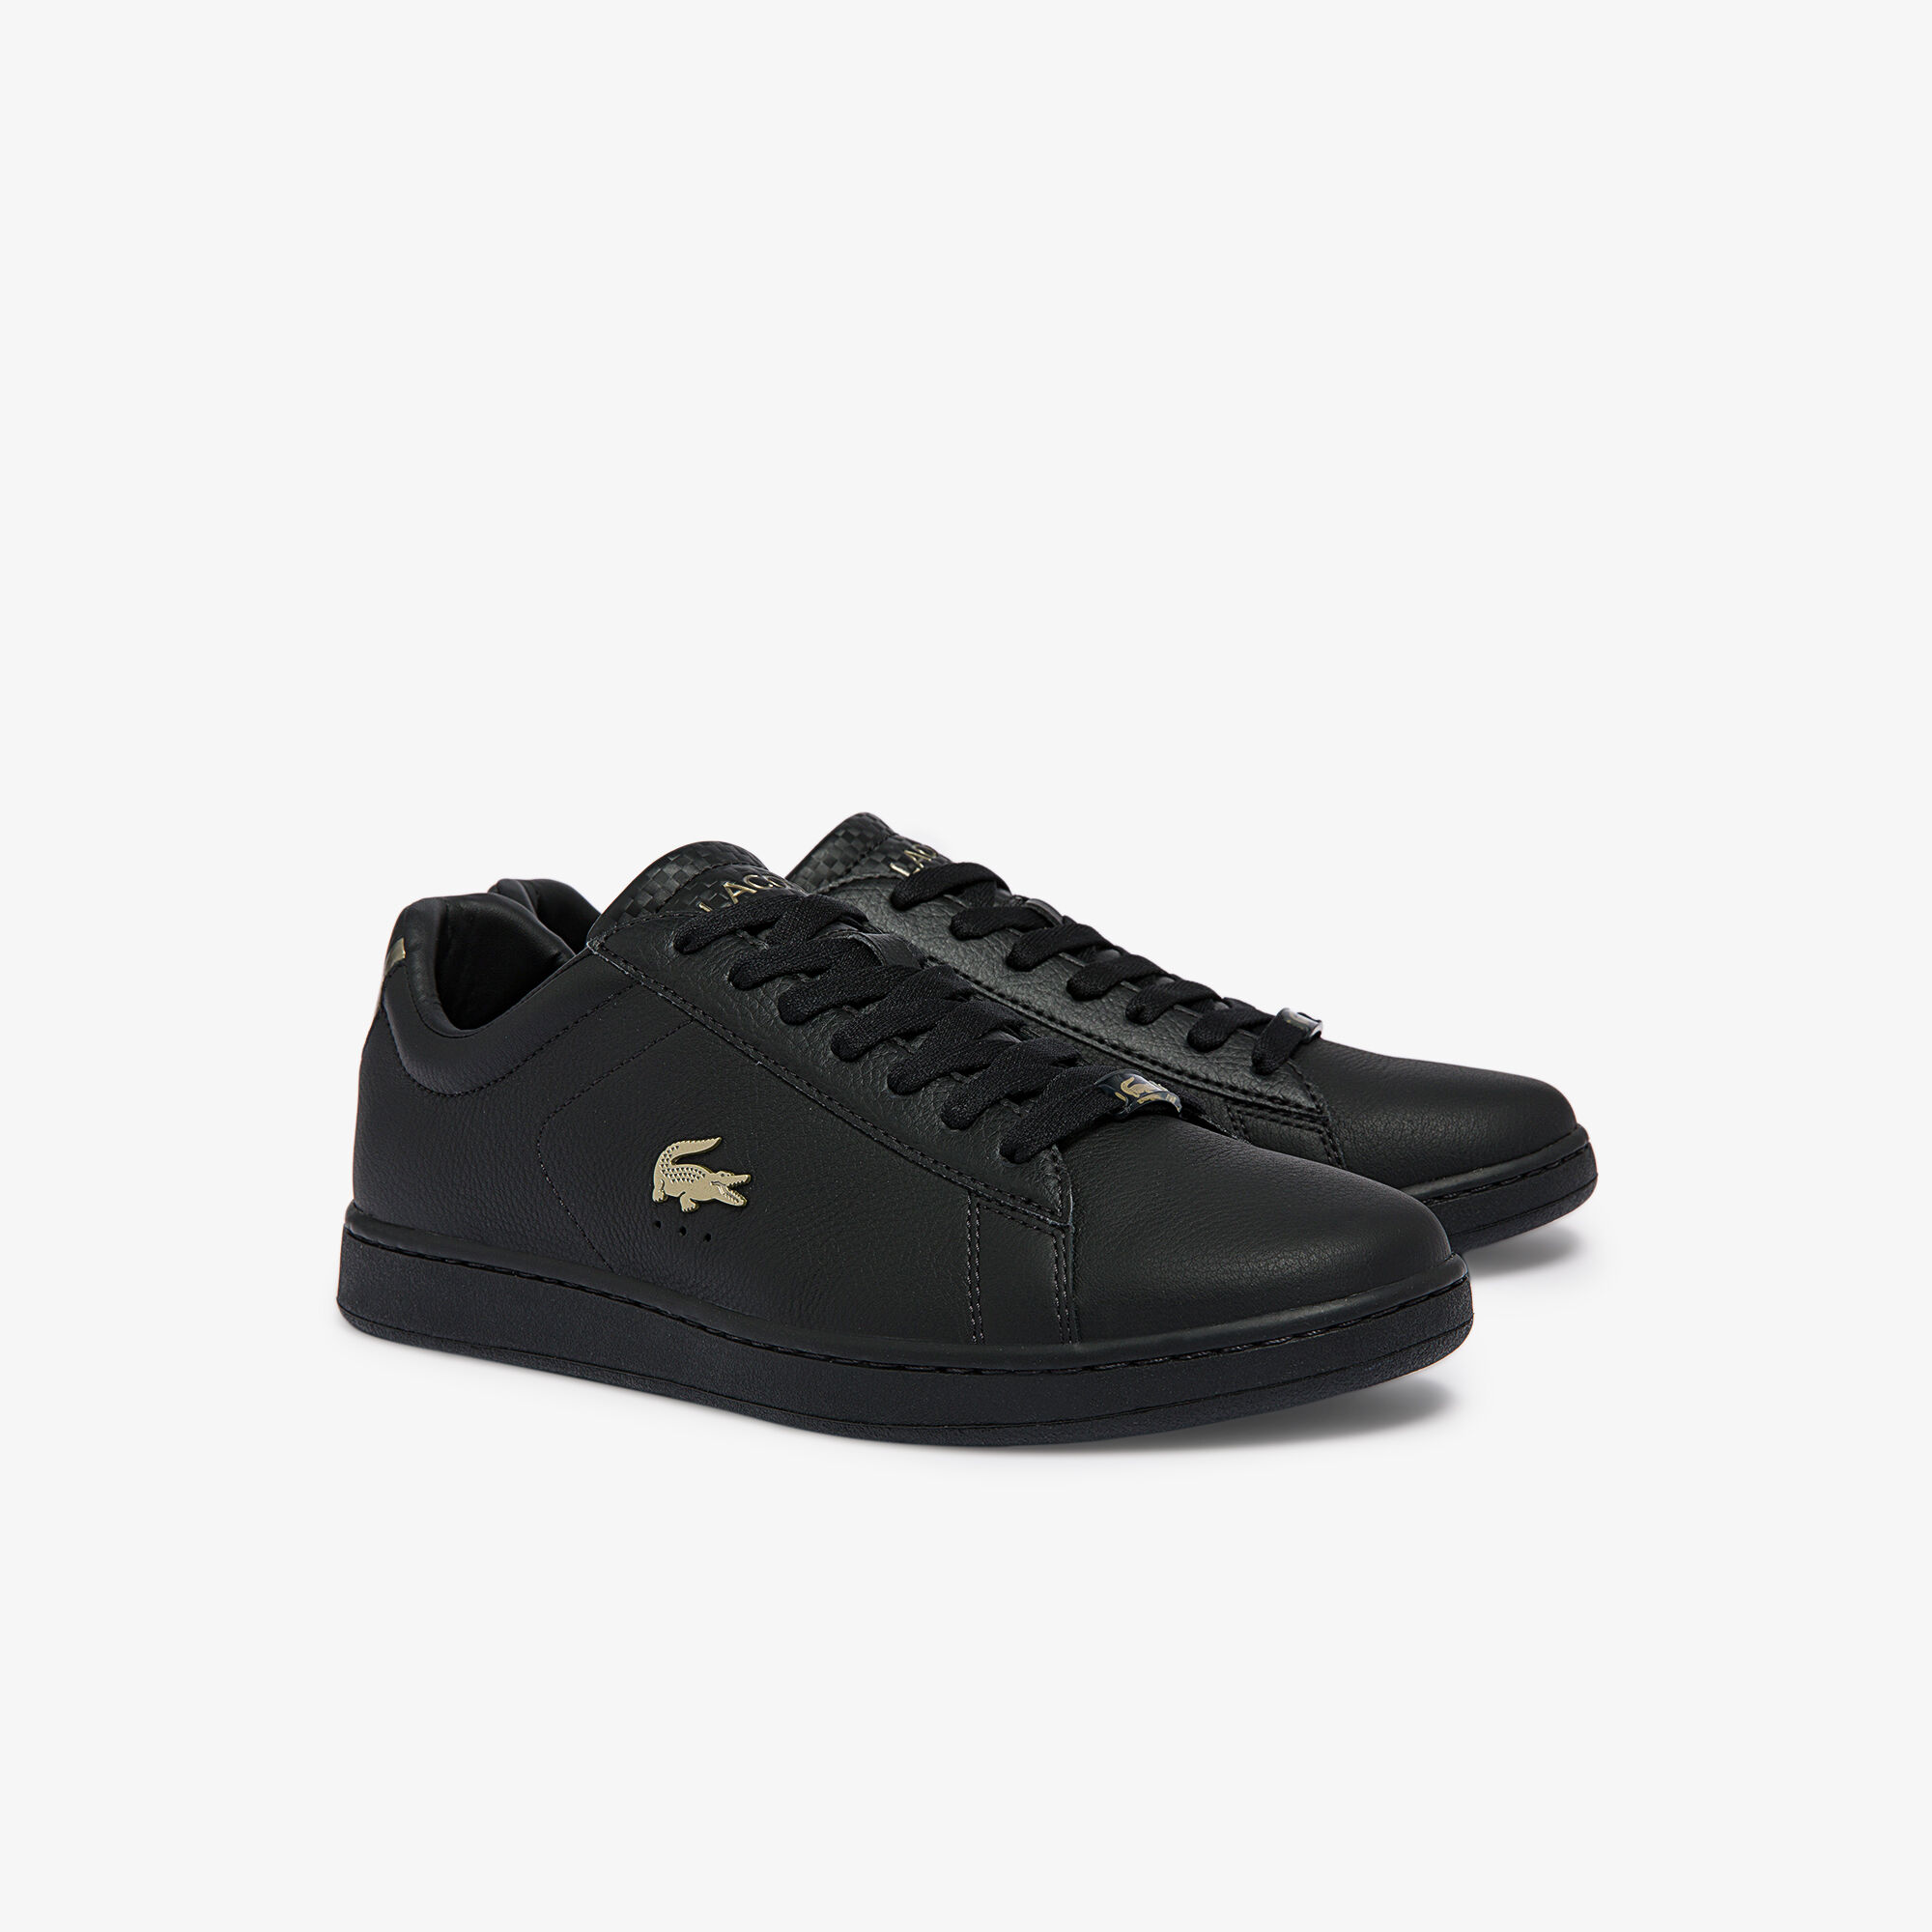 Men's Carnaby Evo Leather Platinum Detailing Trainers